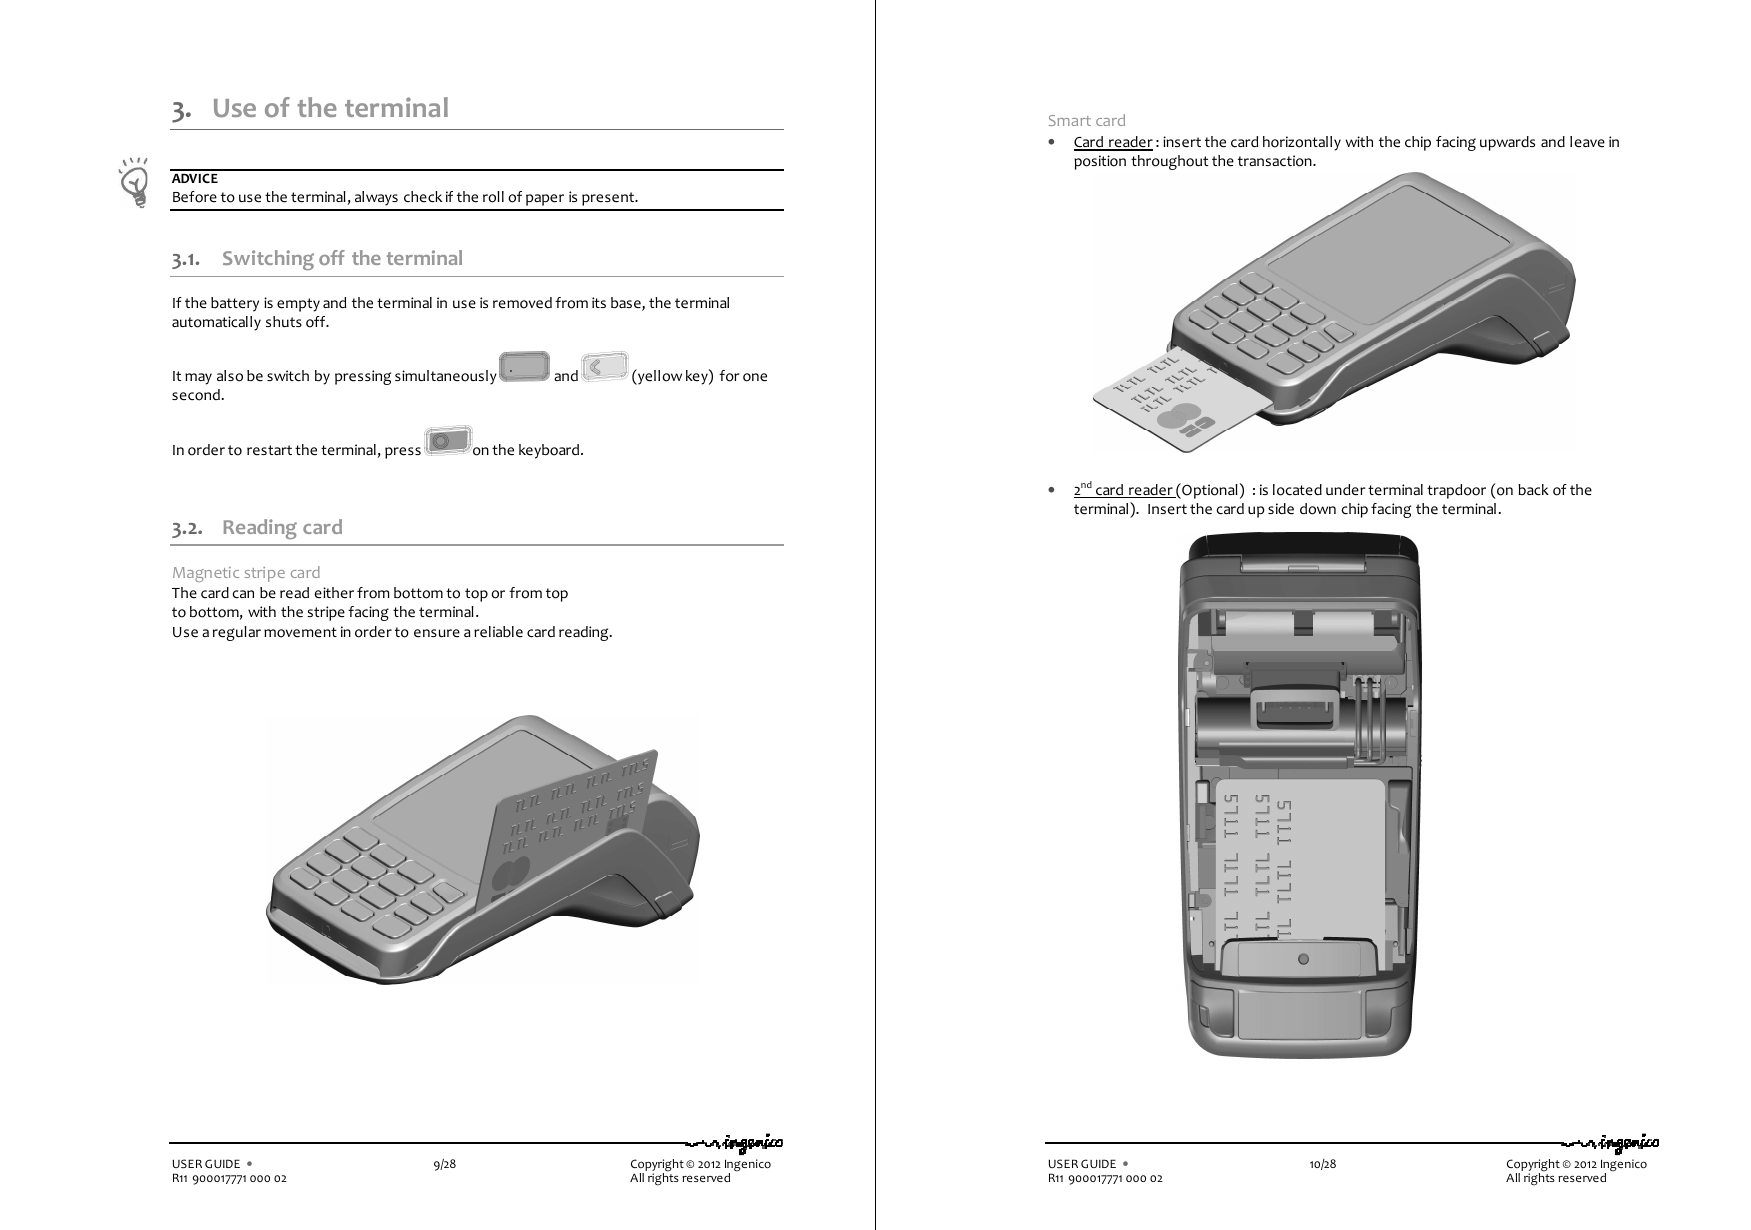   USER GUIDE  •    9/28        Copyright © 2012 Ingenico R11 900017771 000 02          All rights reserved 3. Use of the terminal  ADVICE Before to use the terminal, always check if the roll of paper is present.  3.1. Switching off  the terminal If the battery is empty and the terminal in use is removed from its base, the terminal automatically shuts off.  It may also be switch by pressing simultaneously   and   (yellow key)  for one second.  In order to restart the terminal, press  on the keyboard.   3.2. Reading card Magnetic stripe card The card can be read either from bottom to top or from top to bottom, with the stripe facing the terminal. Use a regular movement in order to ensure a reliable card reading.           USER GUIDE  •    10/28        Copyright © 2012 Ingenico R11 900017771 000 02          All rights reserved  Smart card • Card reader : insert the card horizontally with the chip facing upwards and leave in position throughout the transaction.                 • 2nd card reader (Optional)  : is located under terminal trapdoor (on back of the terminal).  Insert the card up side down chip facing the terminal.      